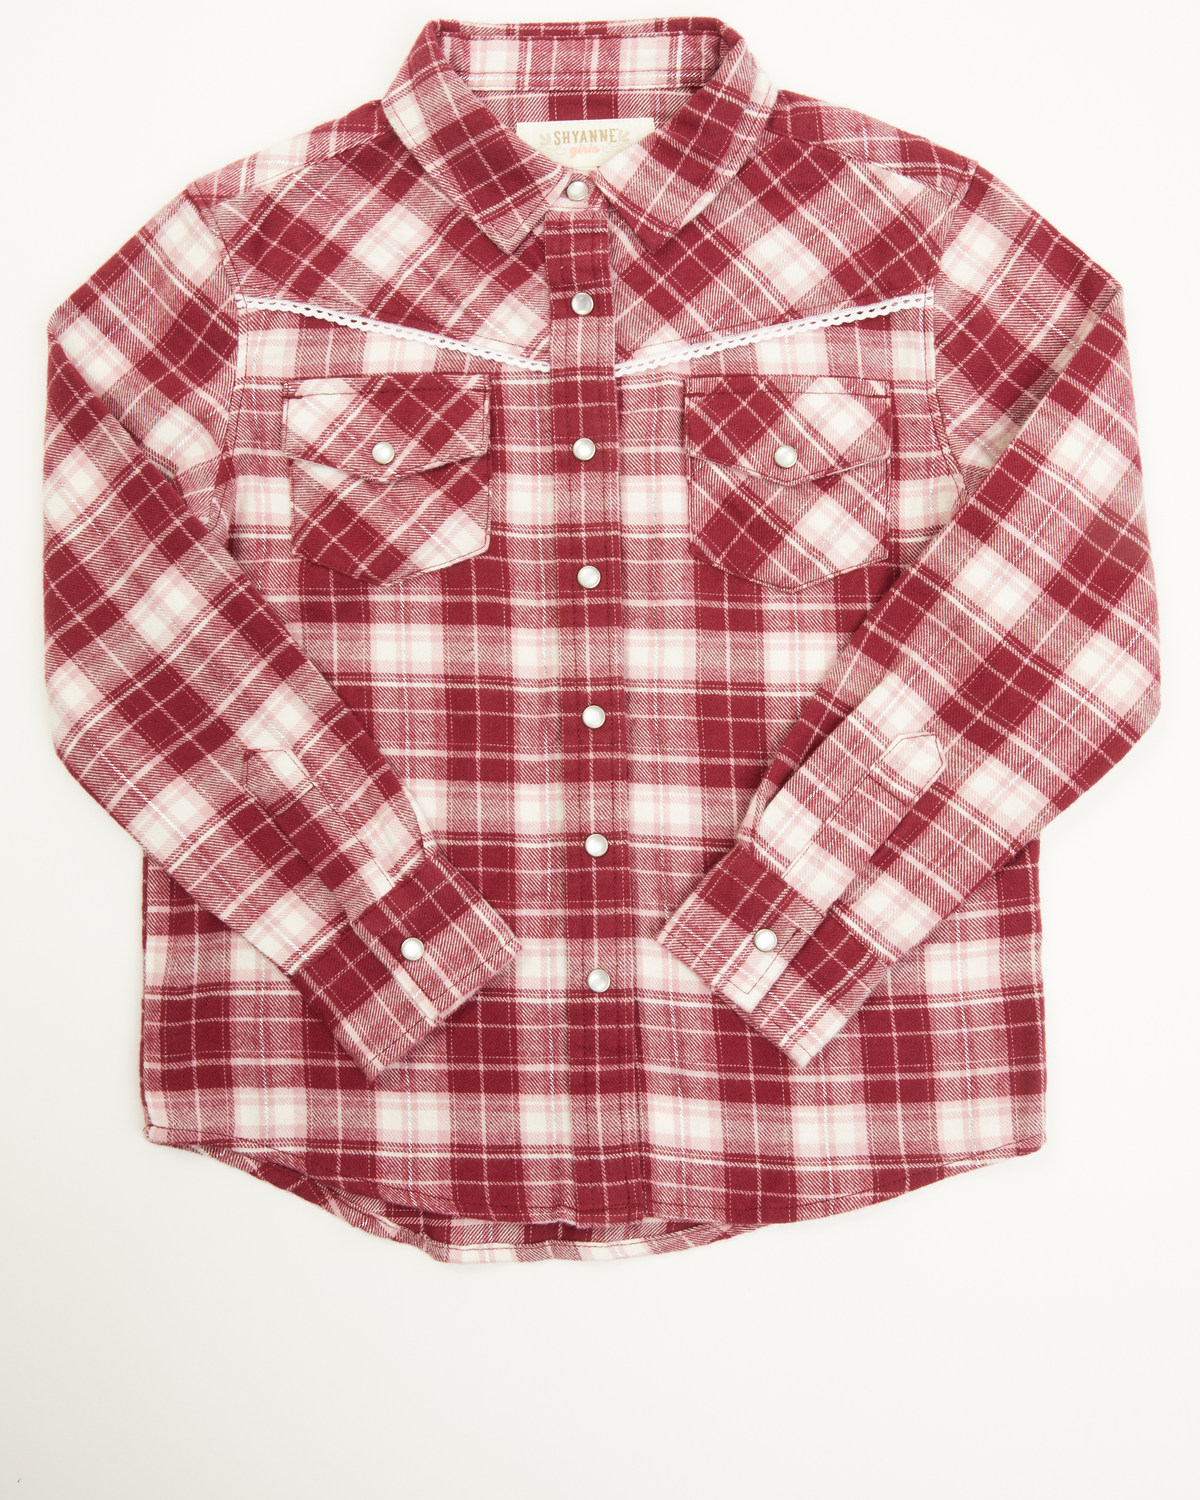 Shyanne Toddler Girls' Holiday Plaid Long Sleeve Pearl Snap Shirt